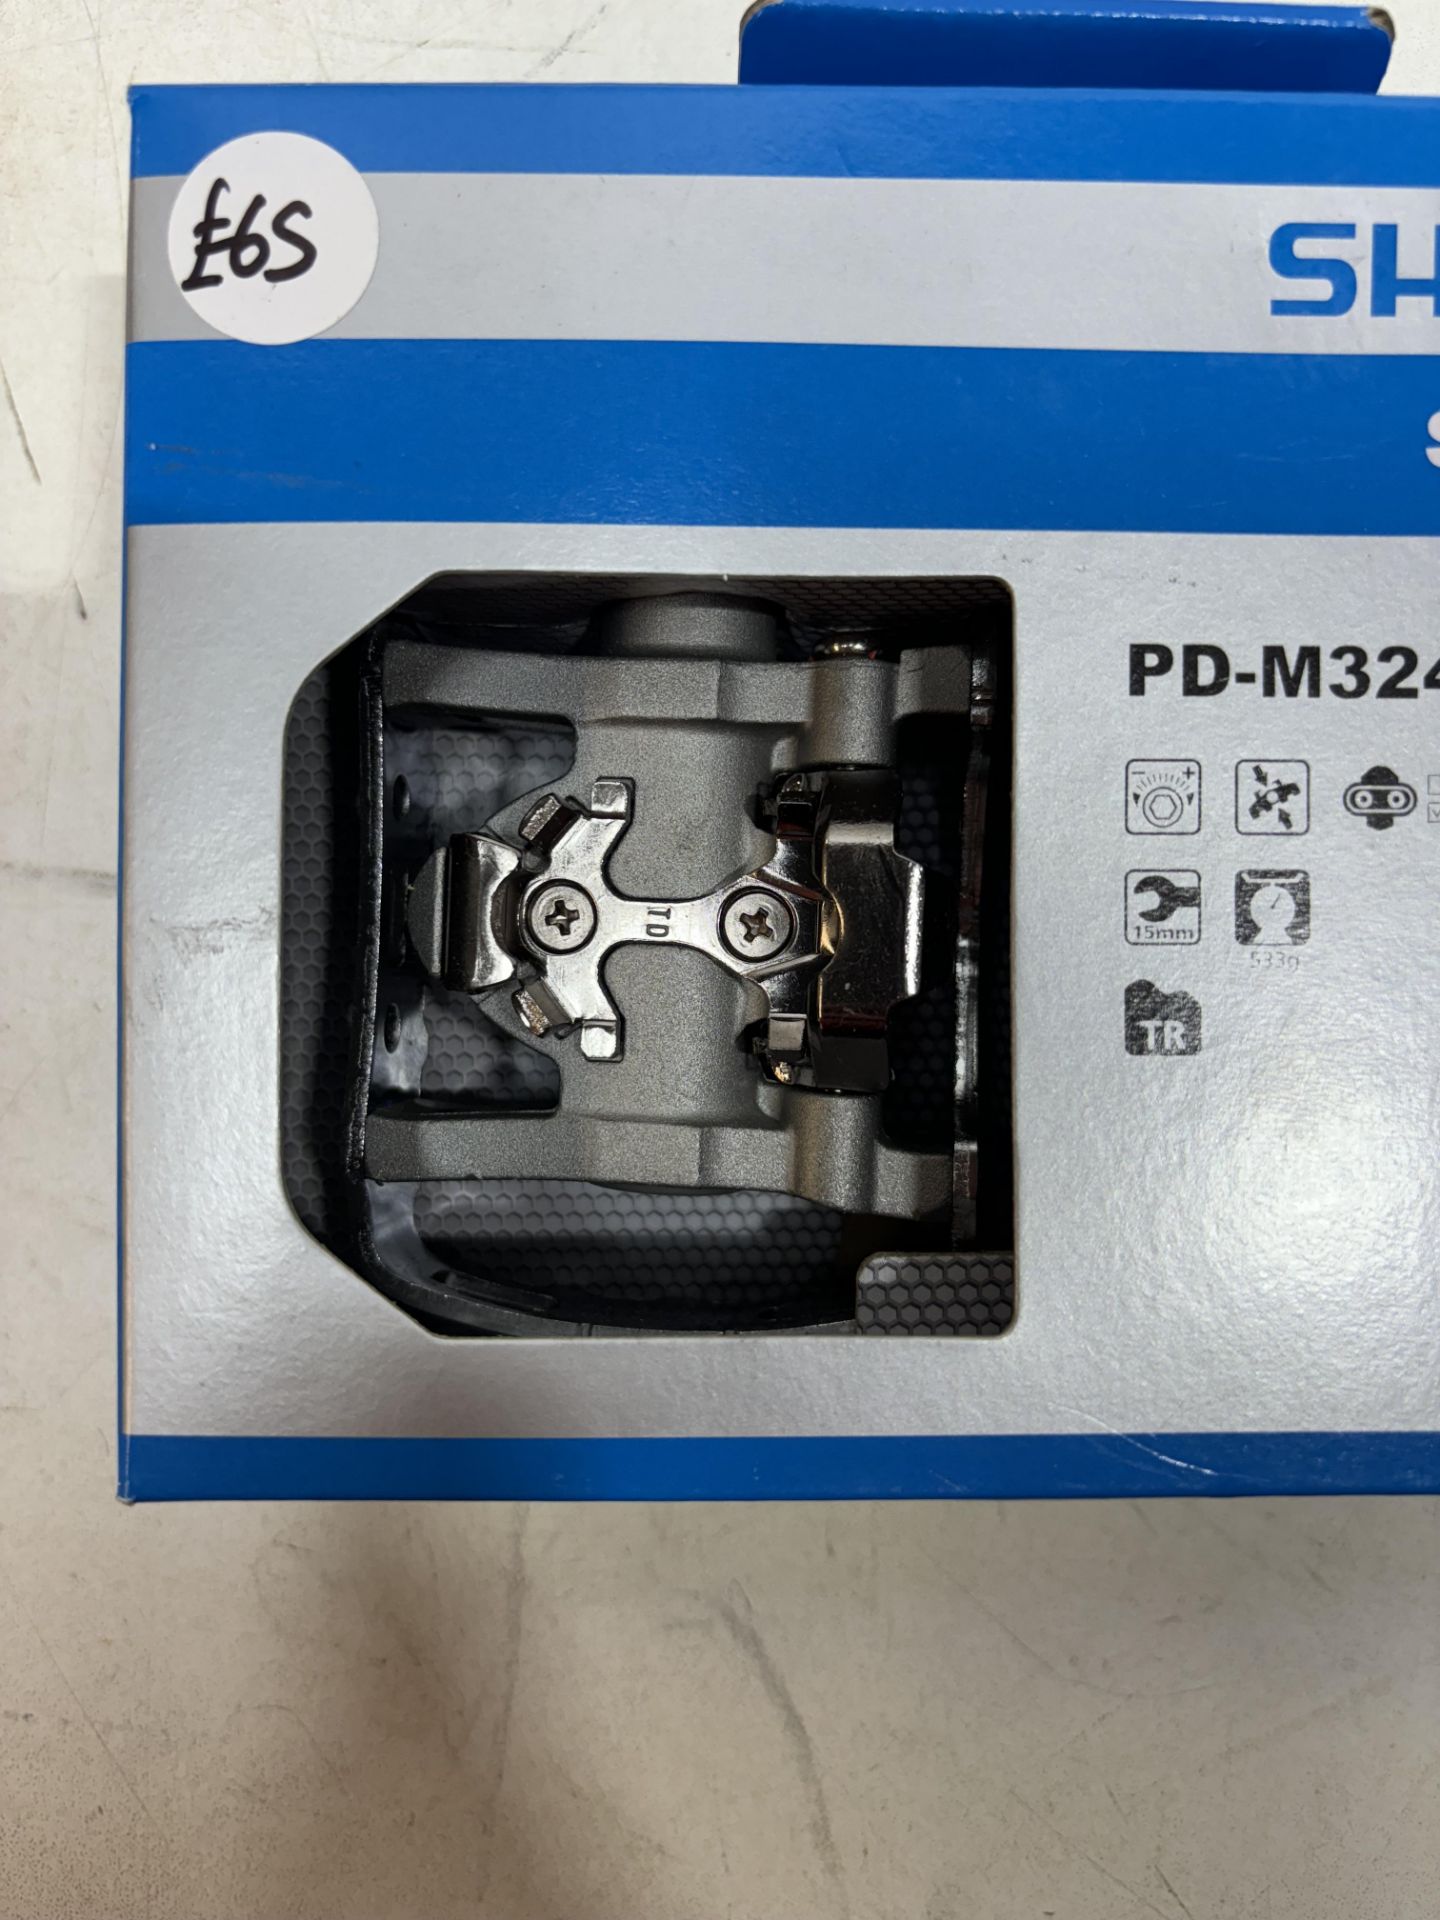 Shimano PD-M324 SPD Pedals, silver - Image 6 of 6